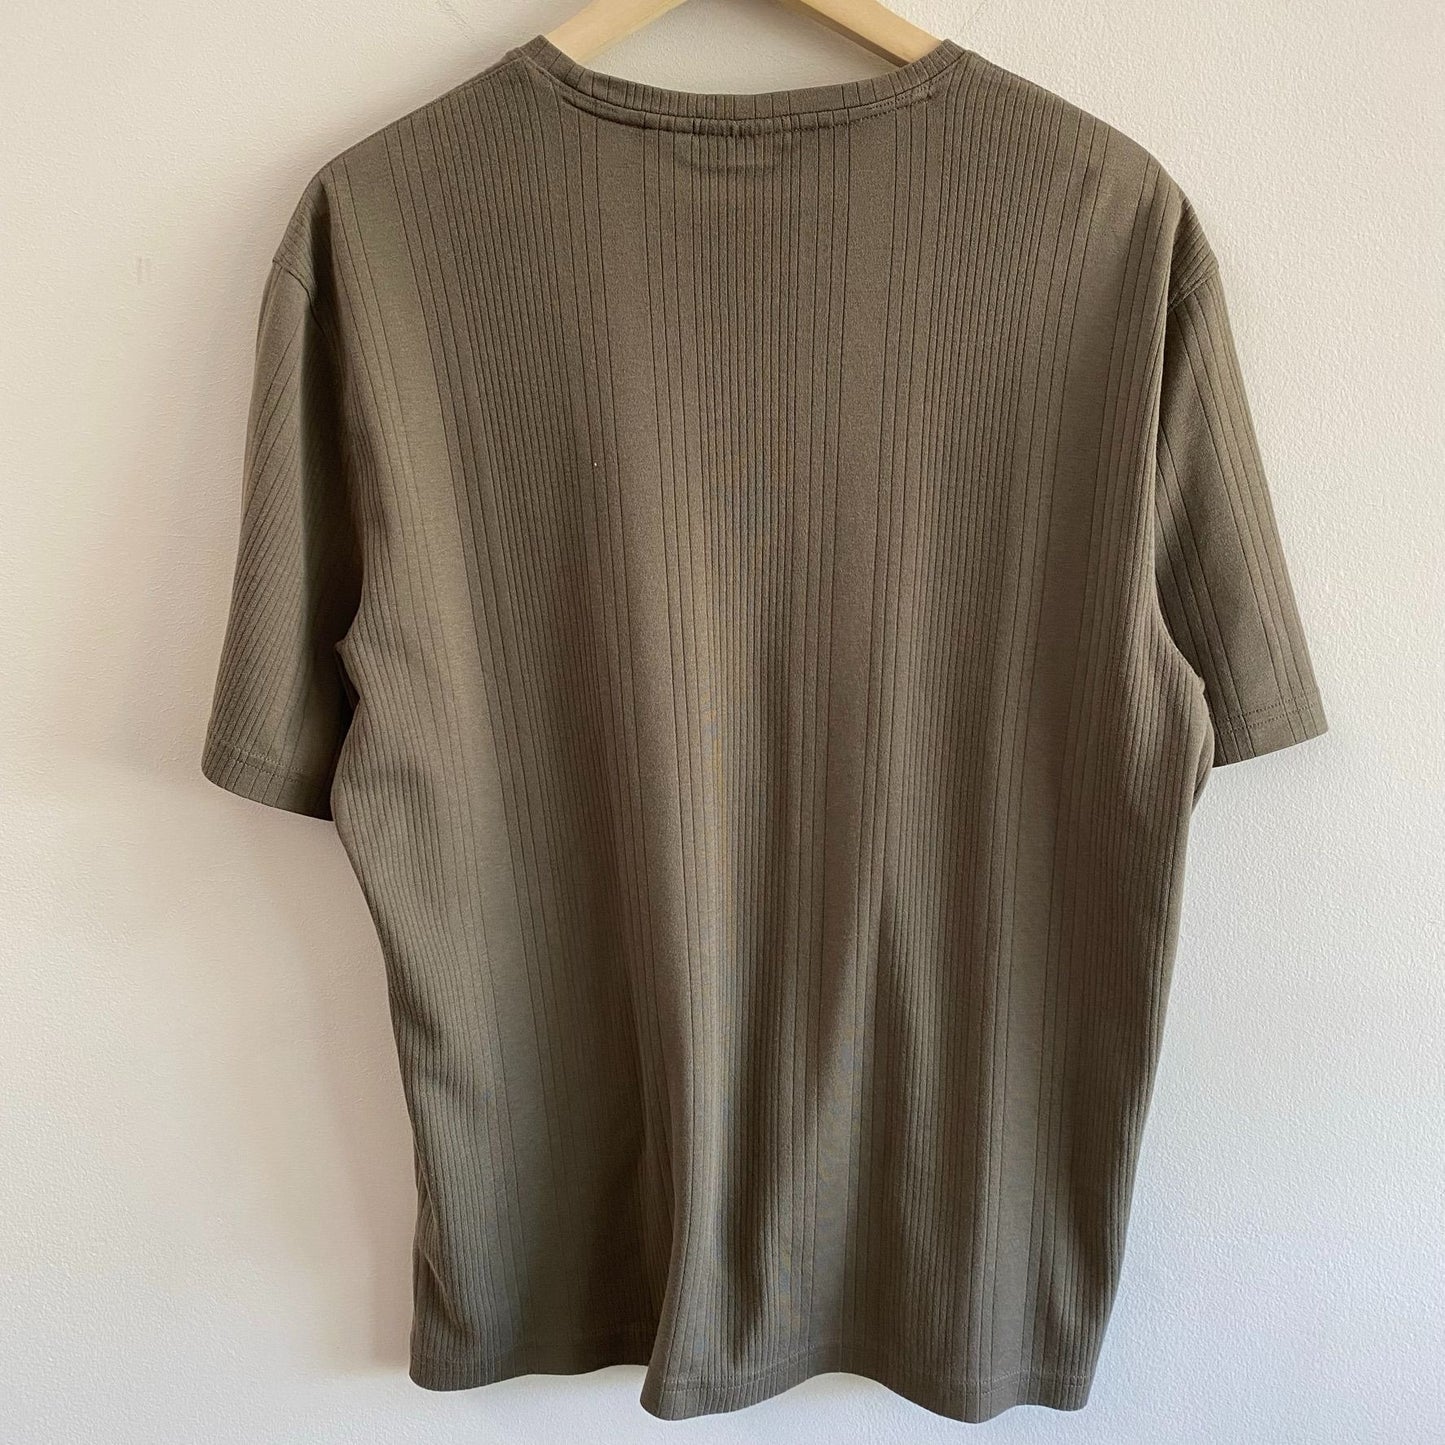 Claiborne Taupe Ribbed S/S Tee